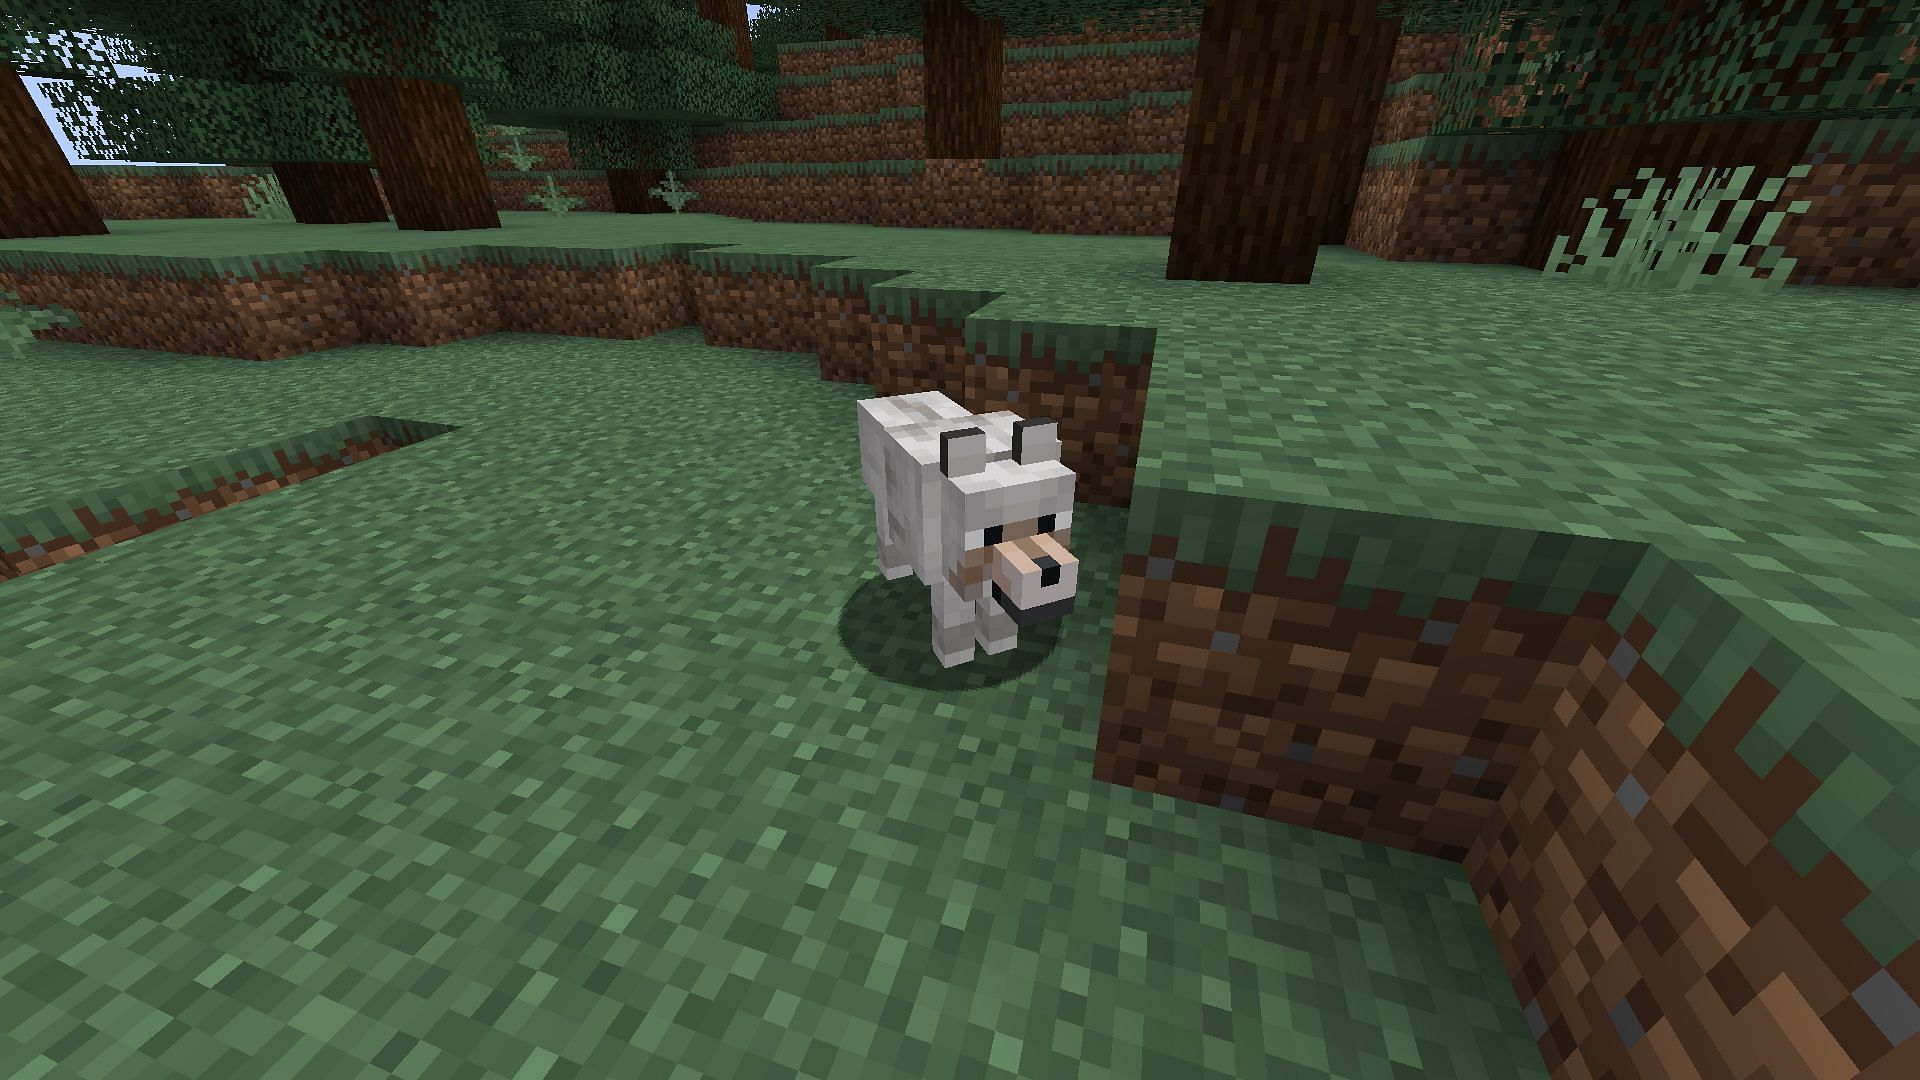 Passive and neutral mobs spawning heavily depends on the biome in Minecraft 1.19 update (Image via Mojang)